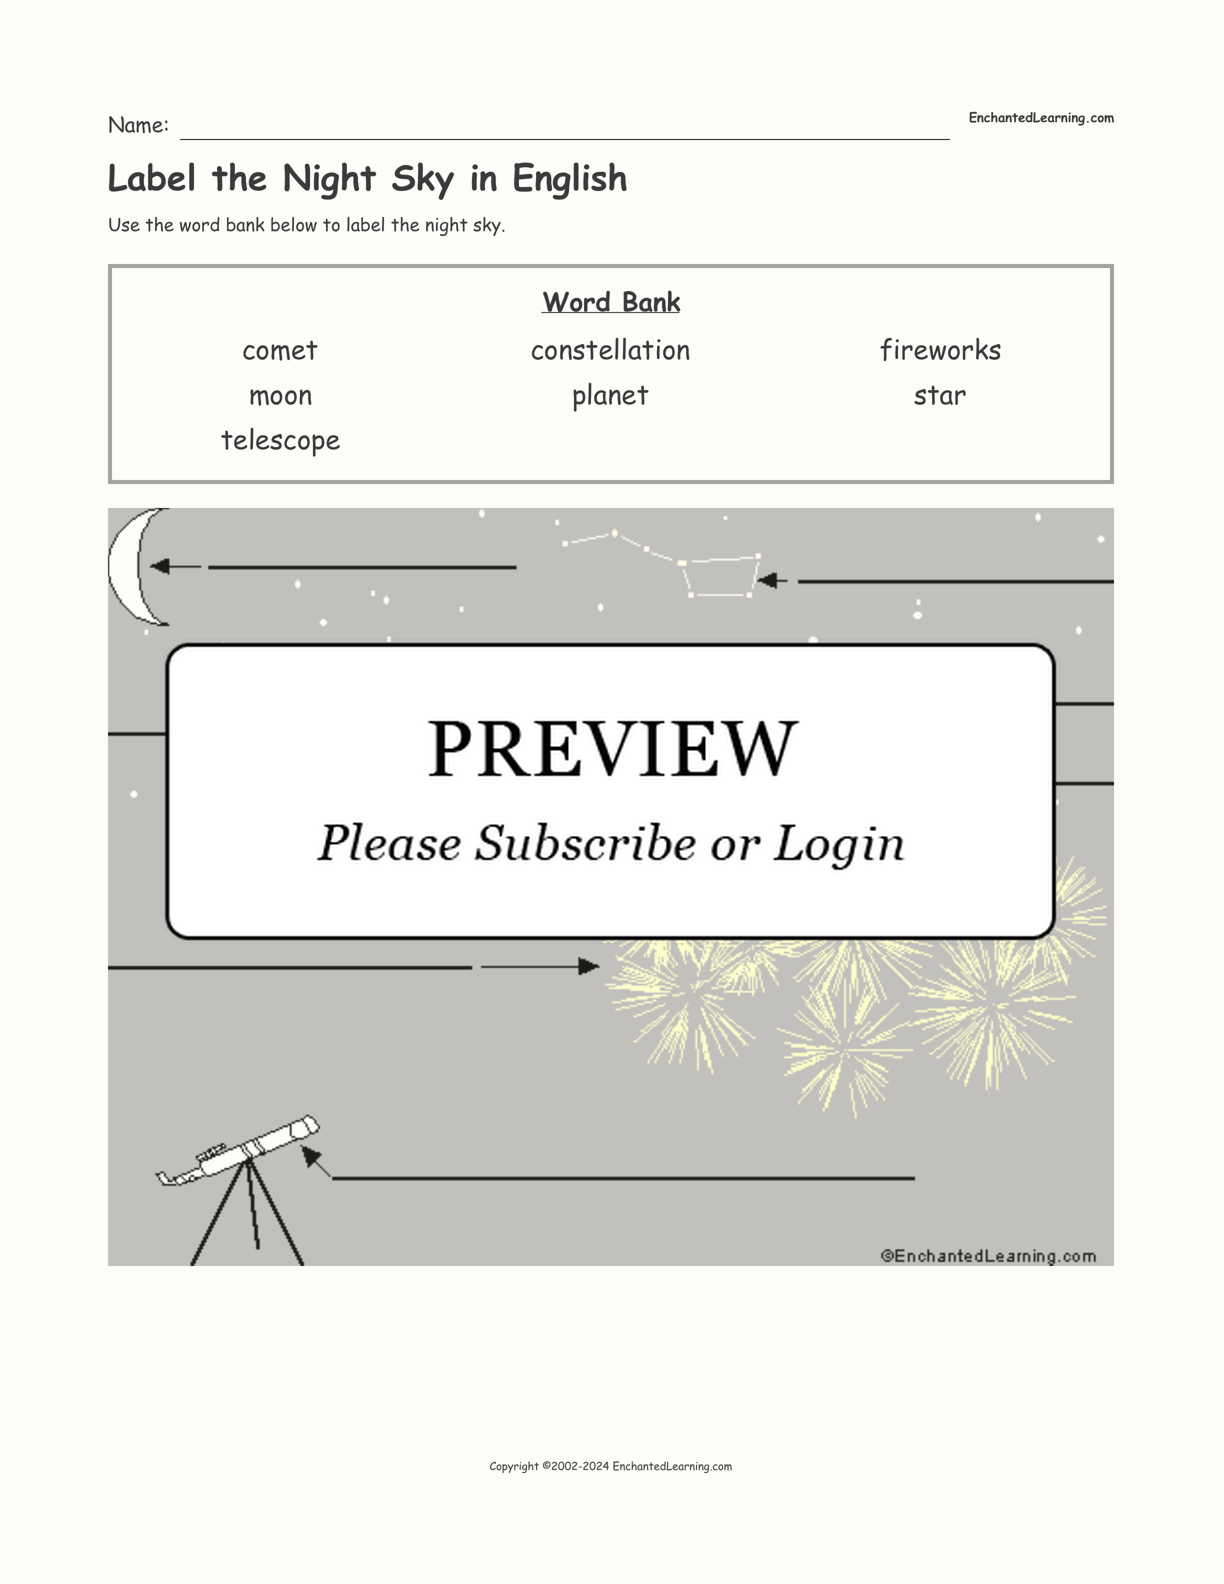 Label the Night Sky in English interactive worksheet page 1